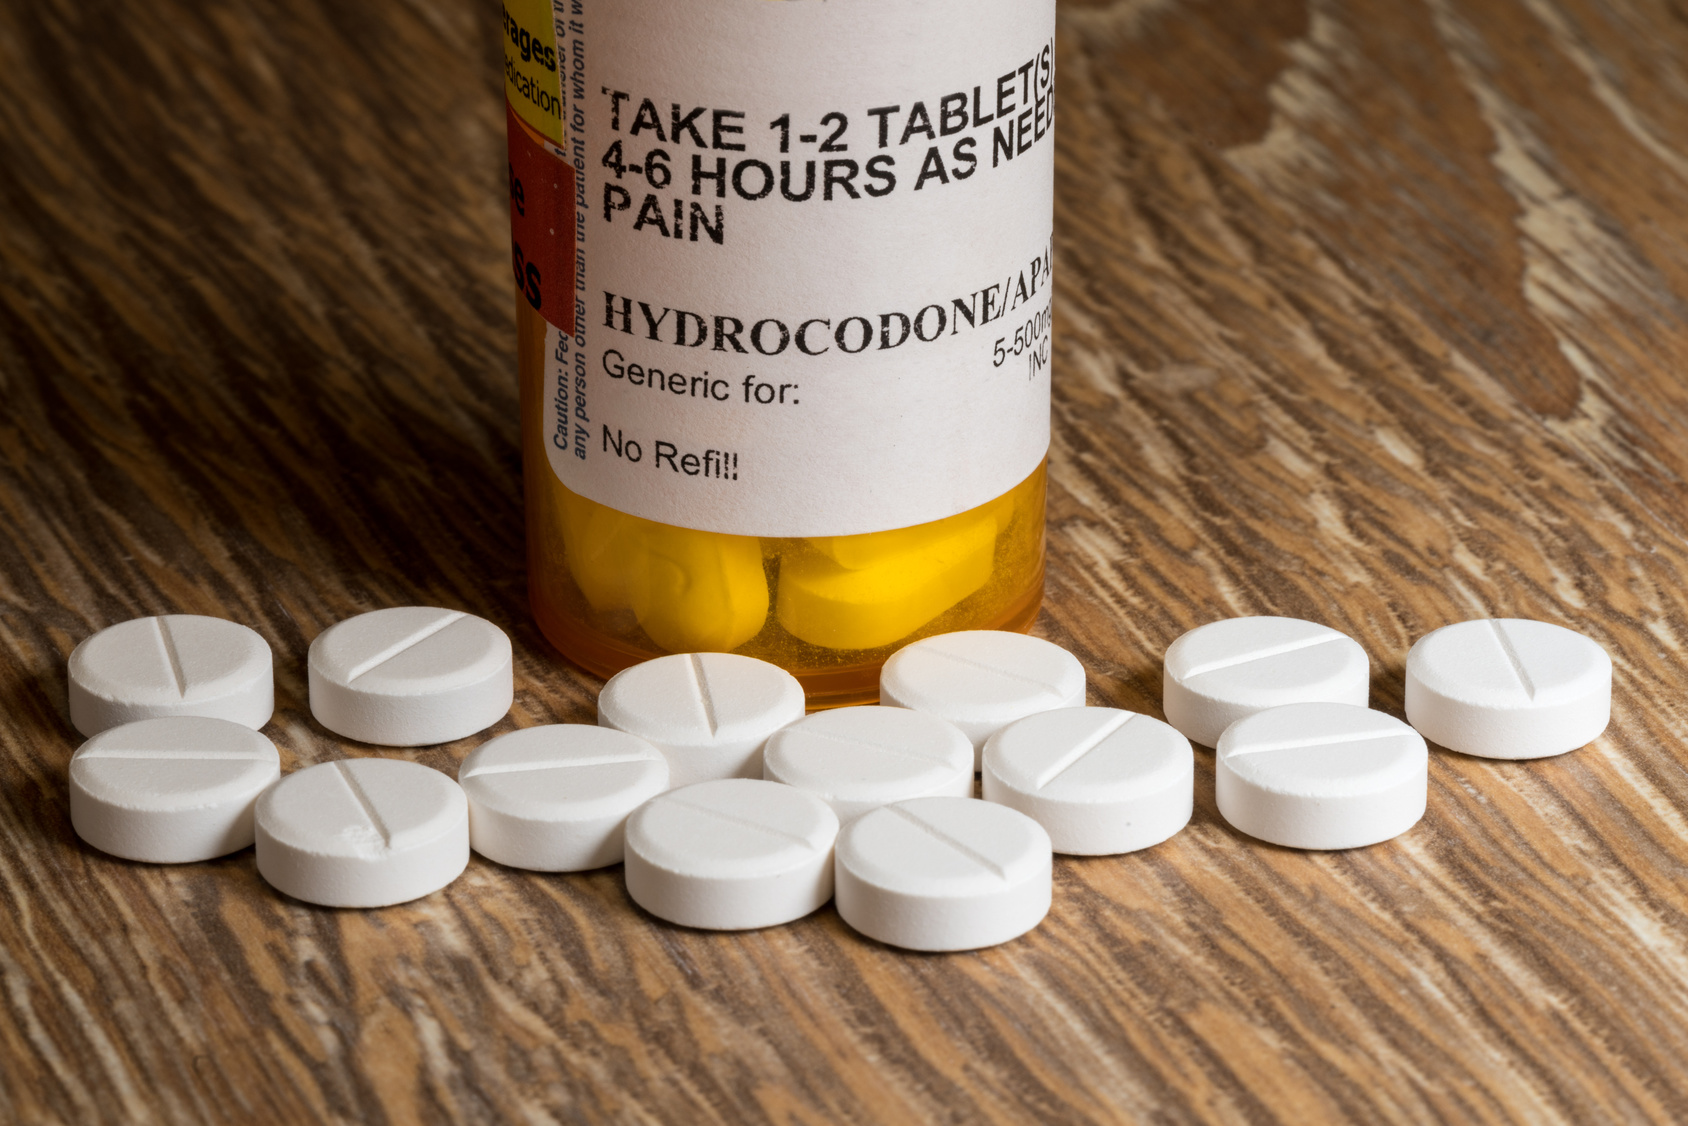 New Opioid Approved by FDA, Mere Days After Trump Signs Opioid Bill